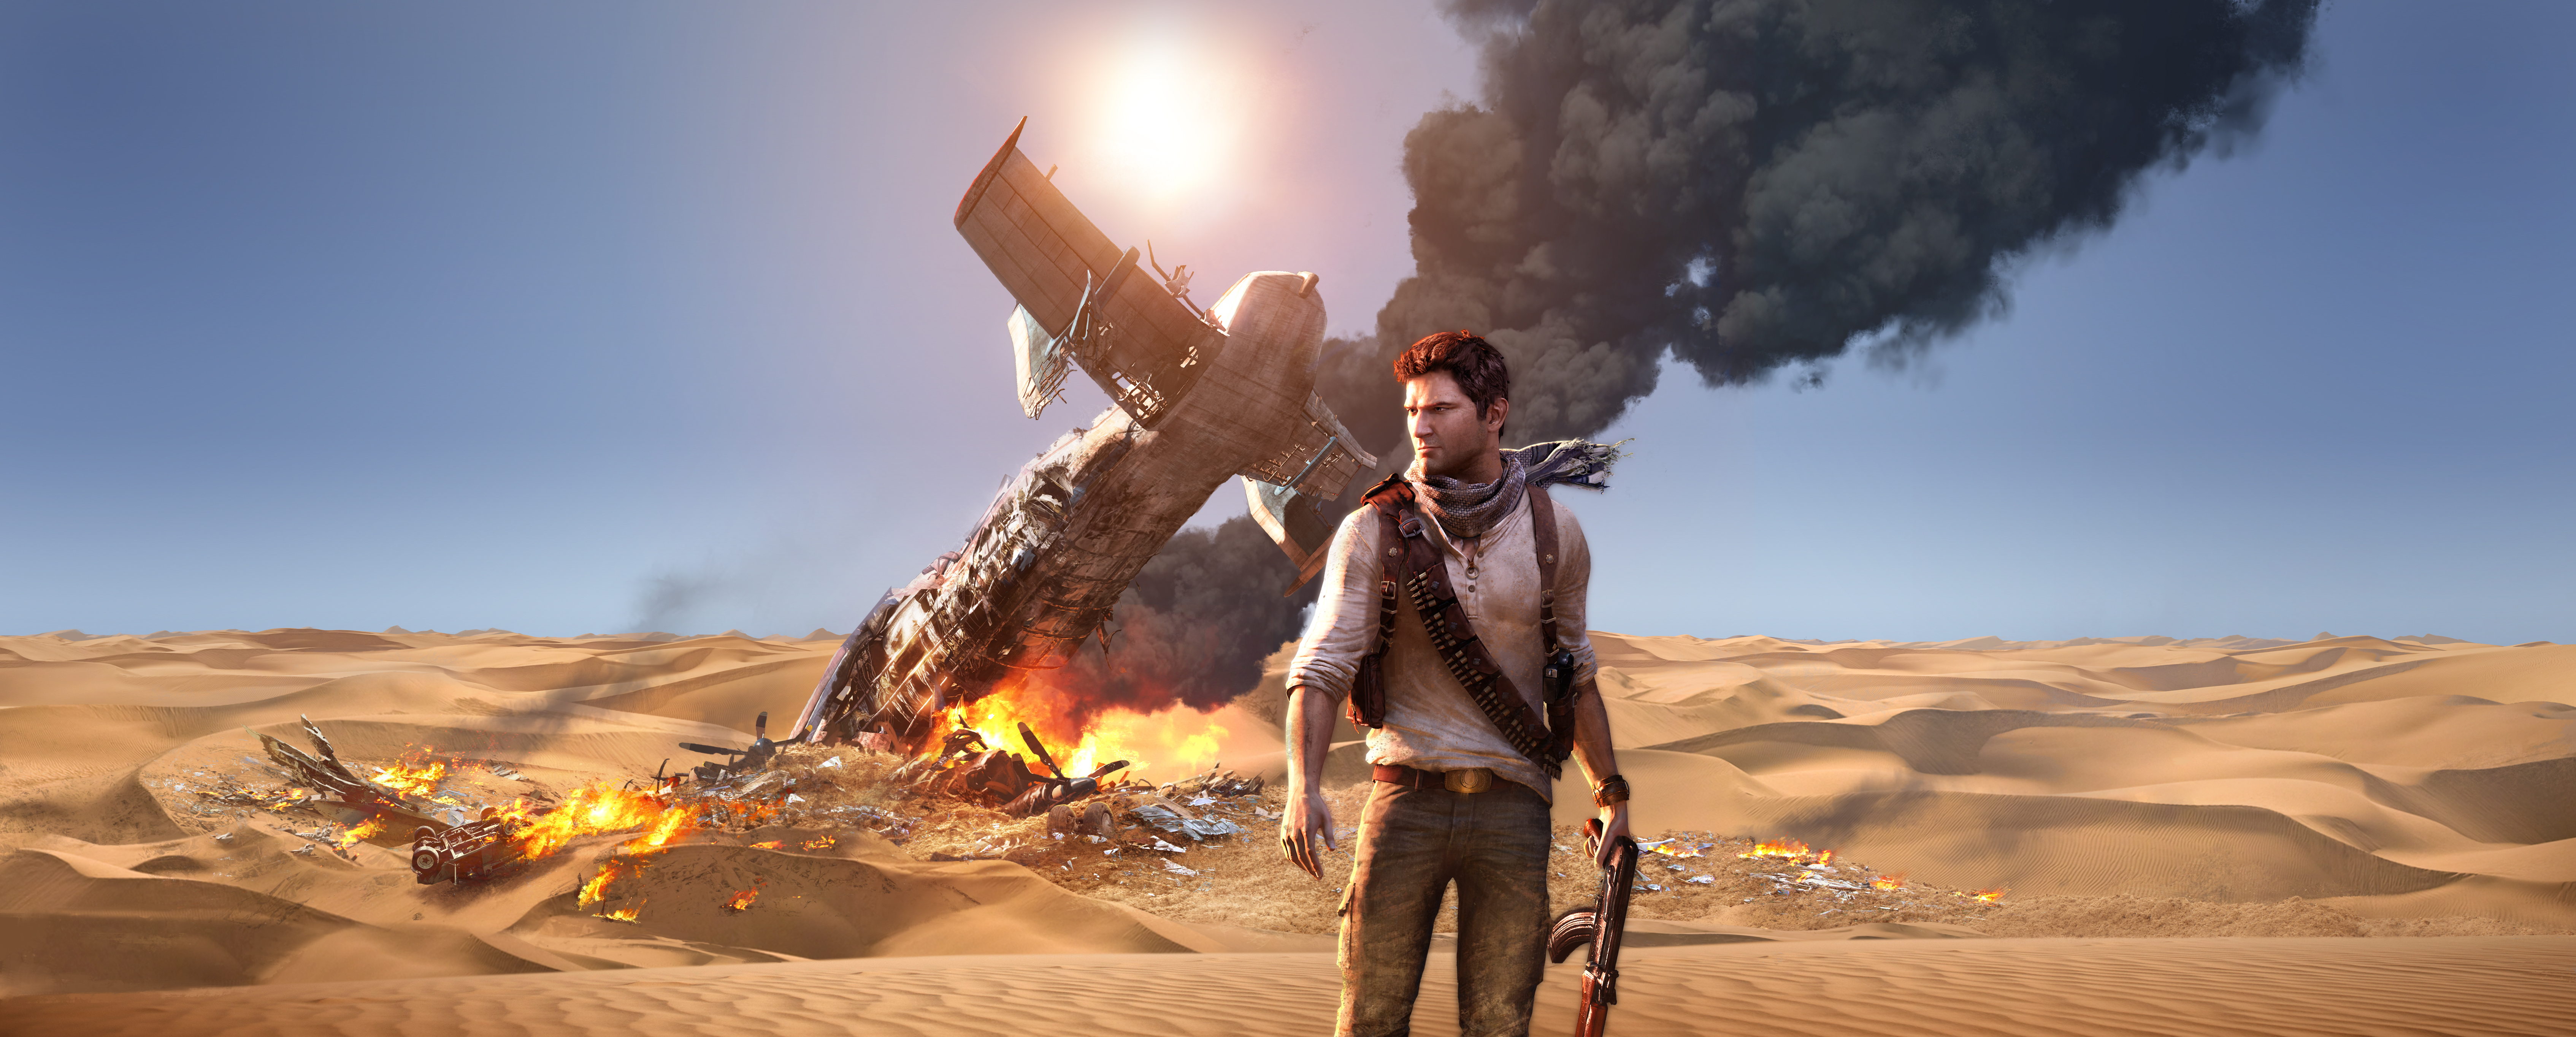 10+ Uncharted 3: Drake's Deception HD Wallpapers and Backgrounds